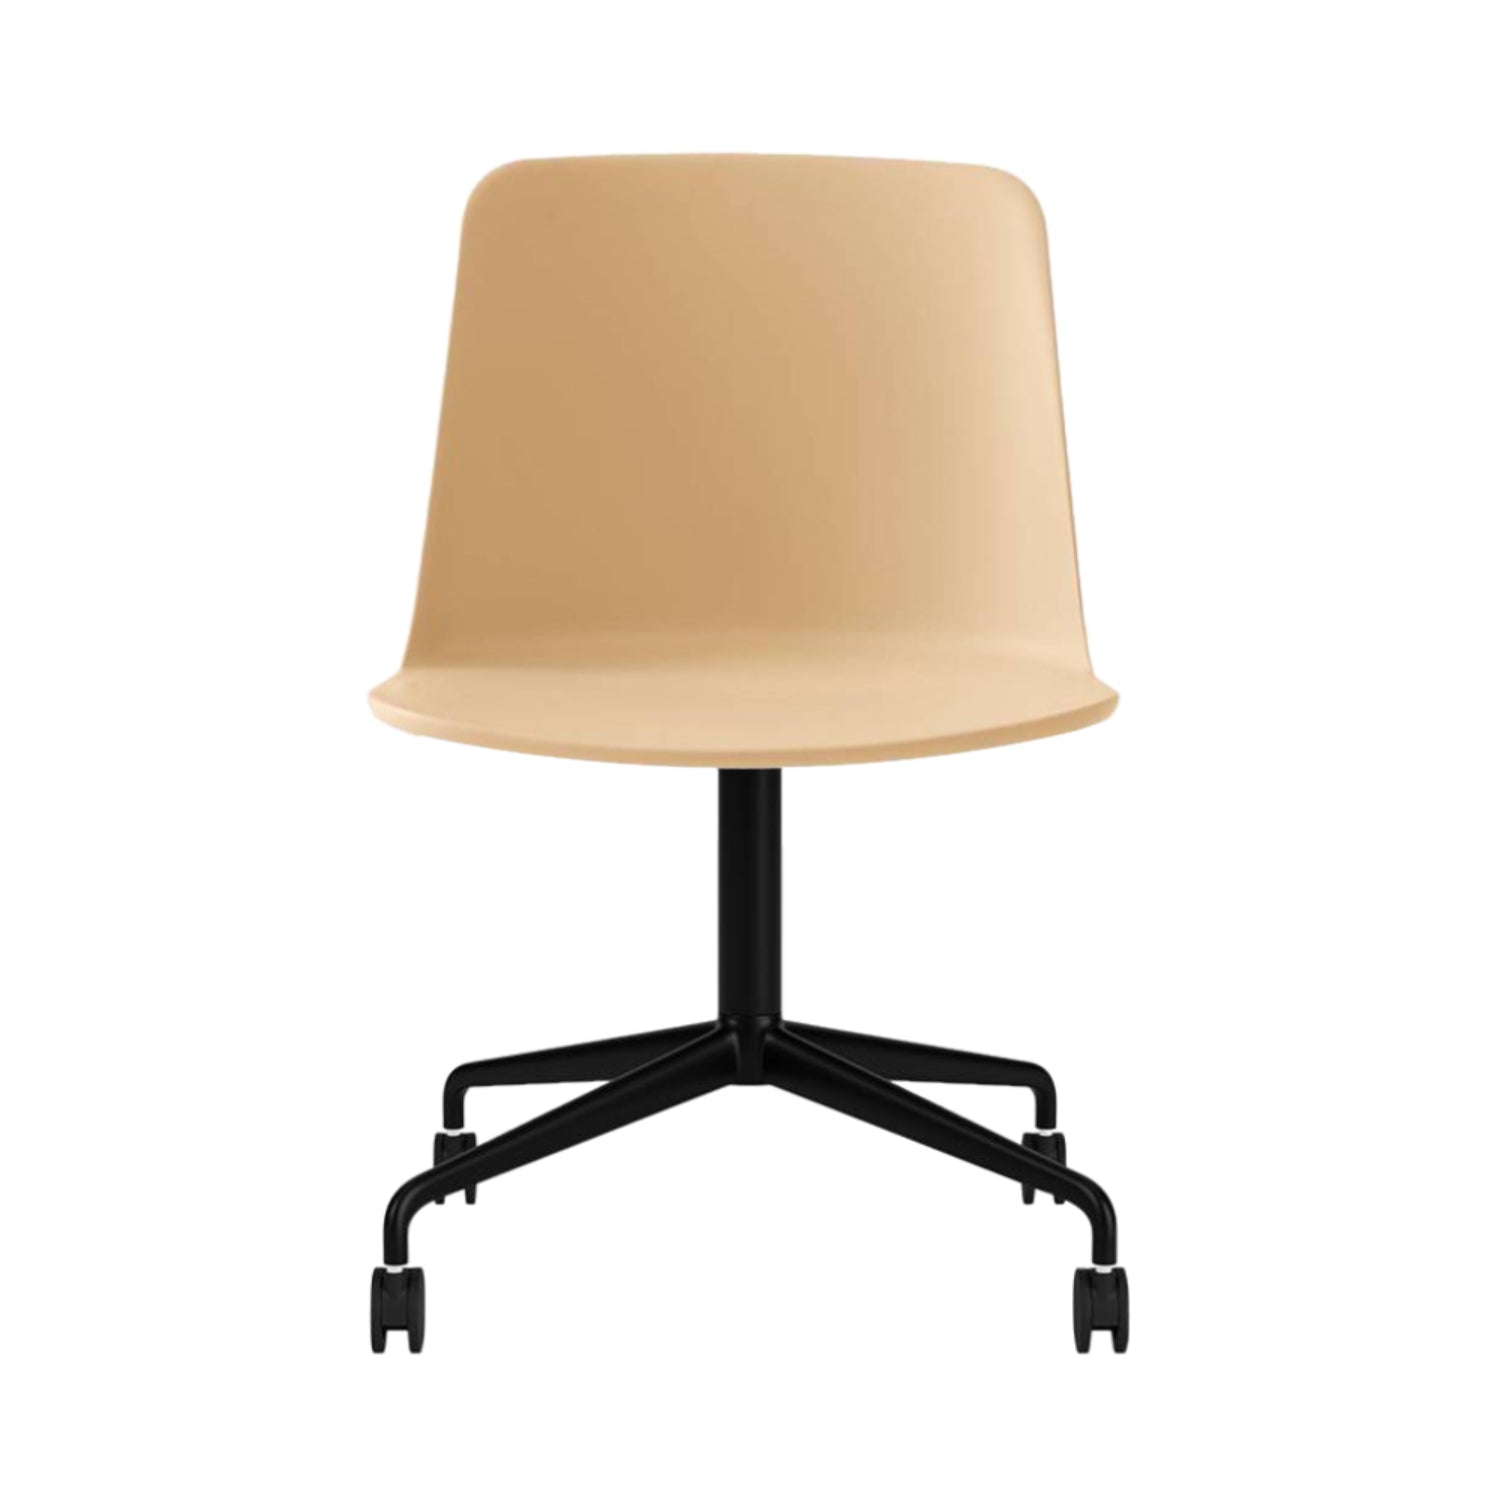 Rely Chair HW21: Beige Sand + Black